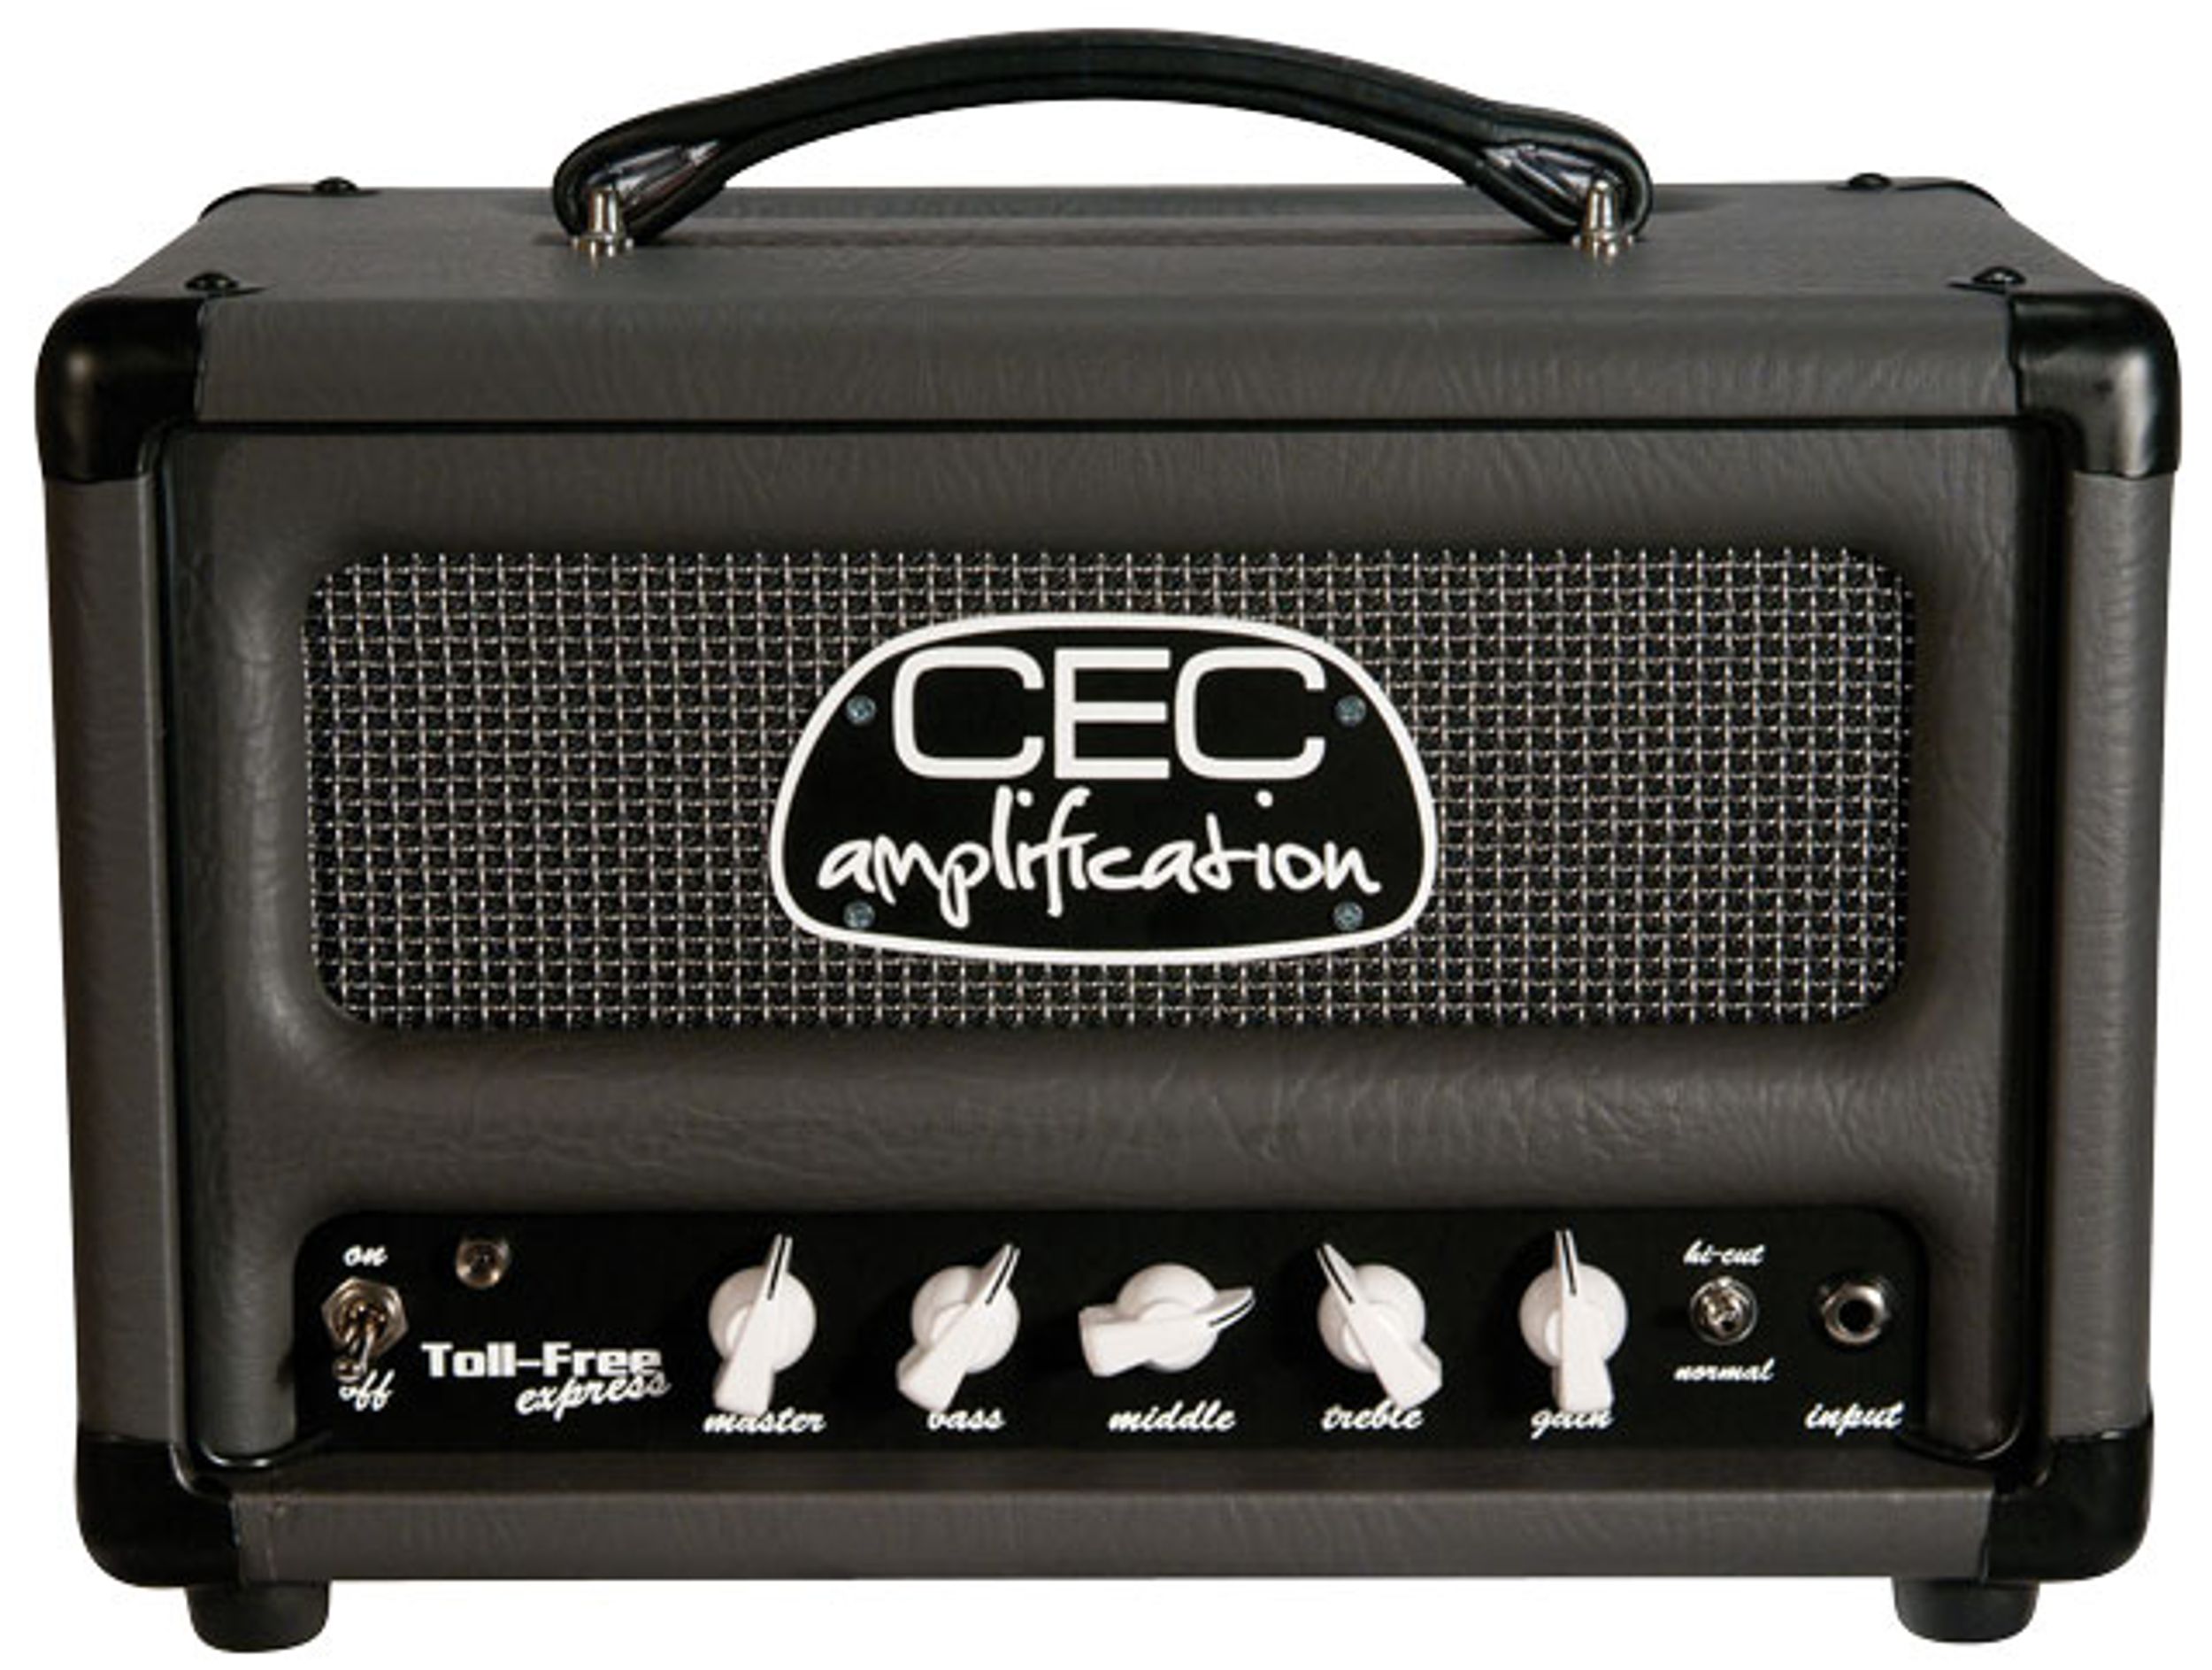 CEC Amplification Toll-Free Express Amp Review